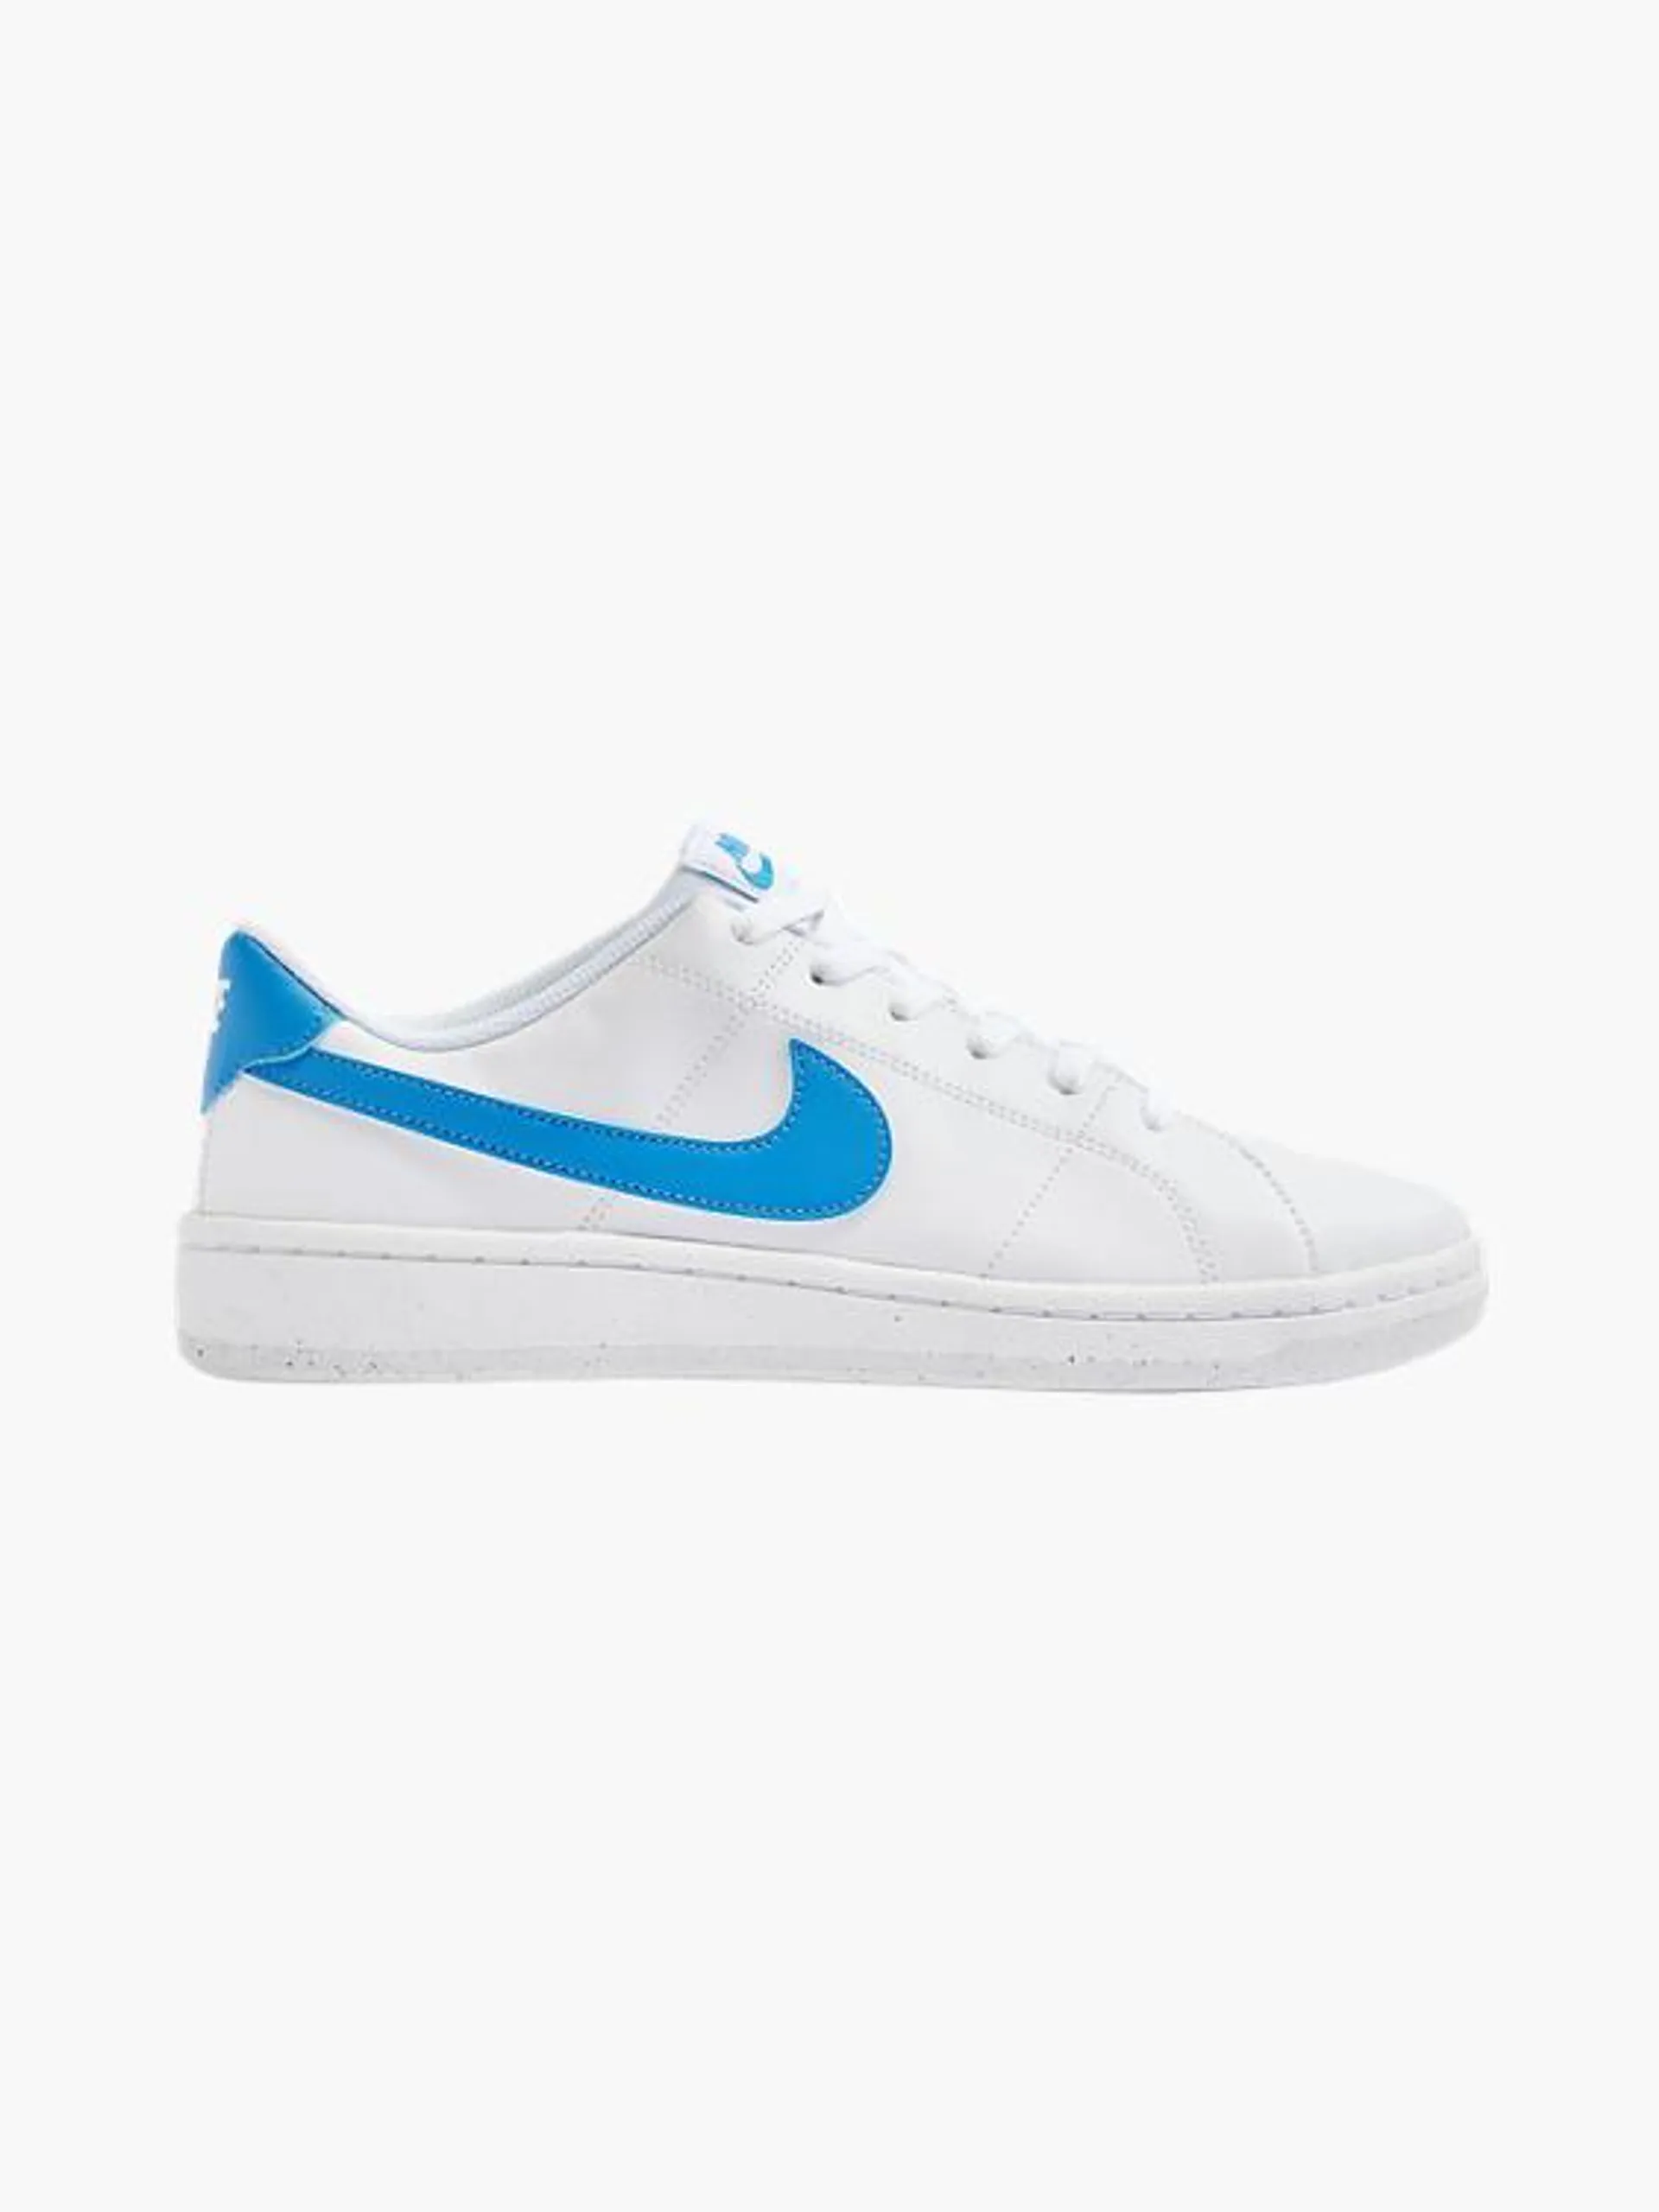 Nike White/Bright Blue Court Royale Lace-up Trainer